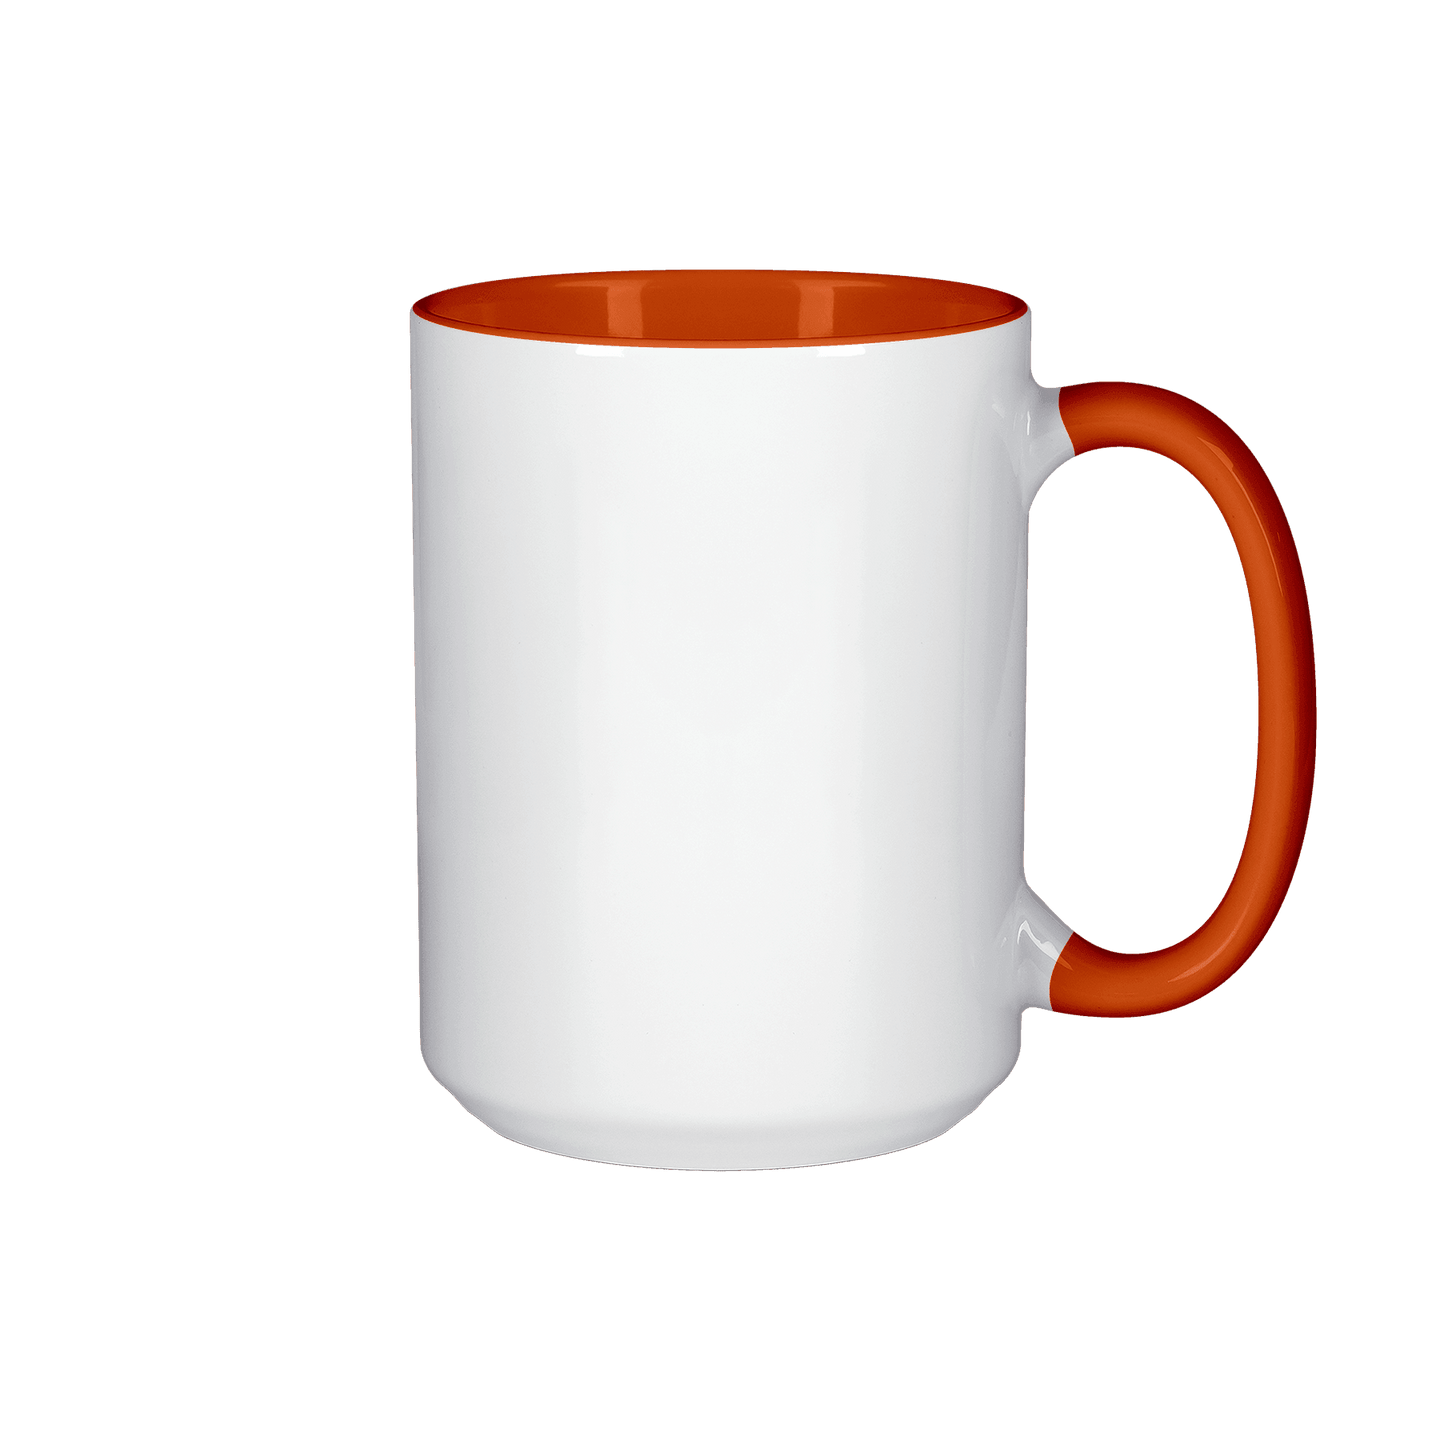 SUBLIMATION INK MUGS 15oz for DYE SUBLIMATION / Discount Supplies